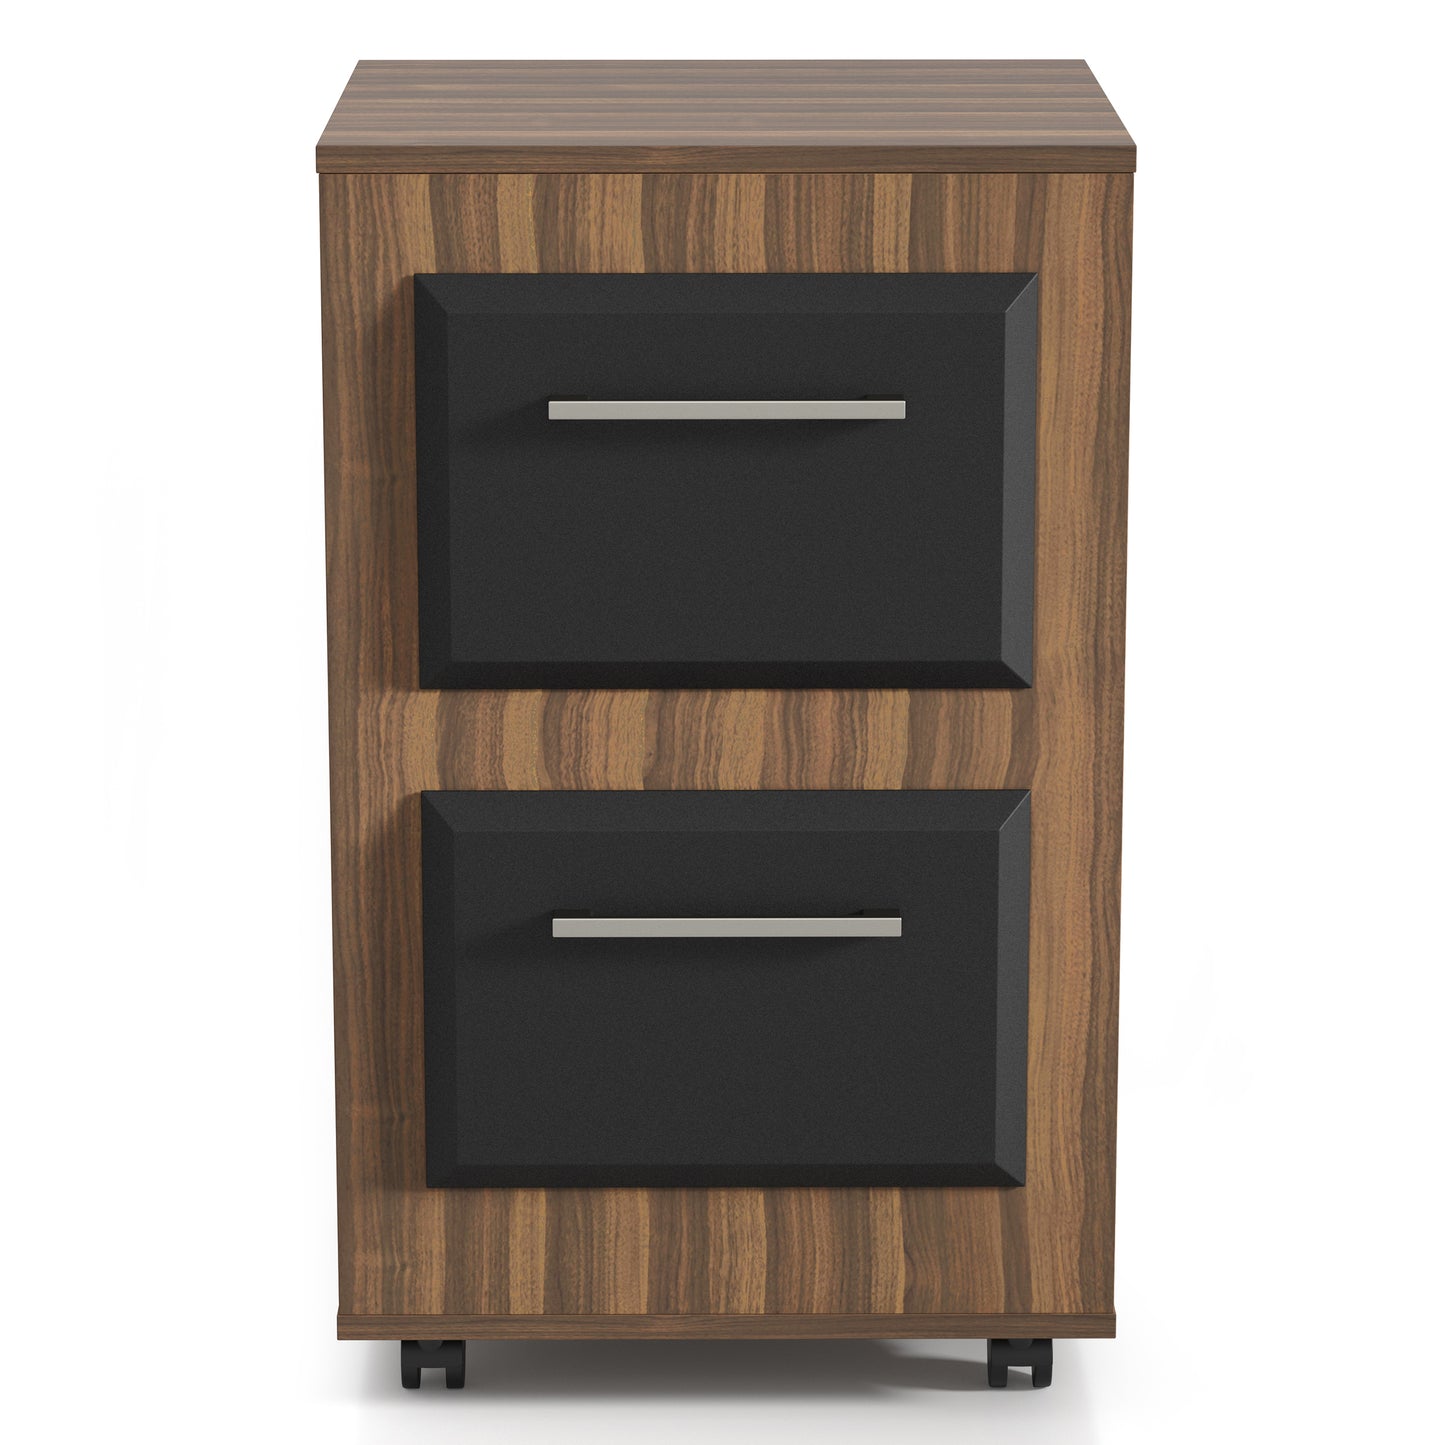 Front-facing contemporary light walnut two-tone two-drawer mobile file cabinet on a white background